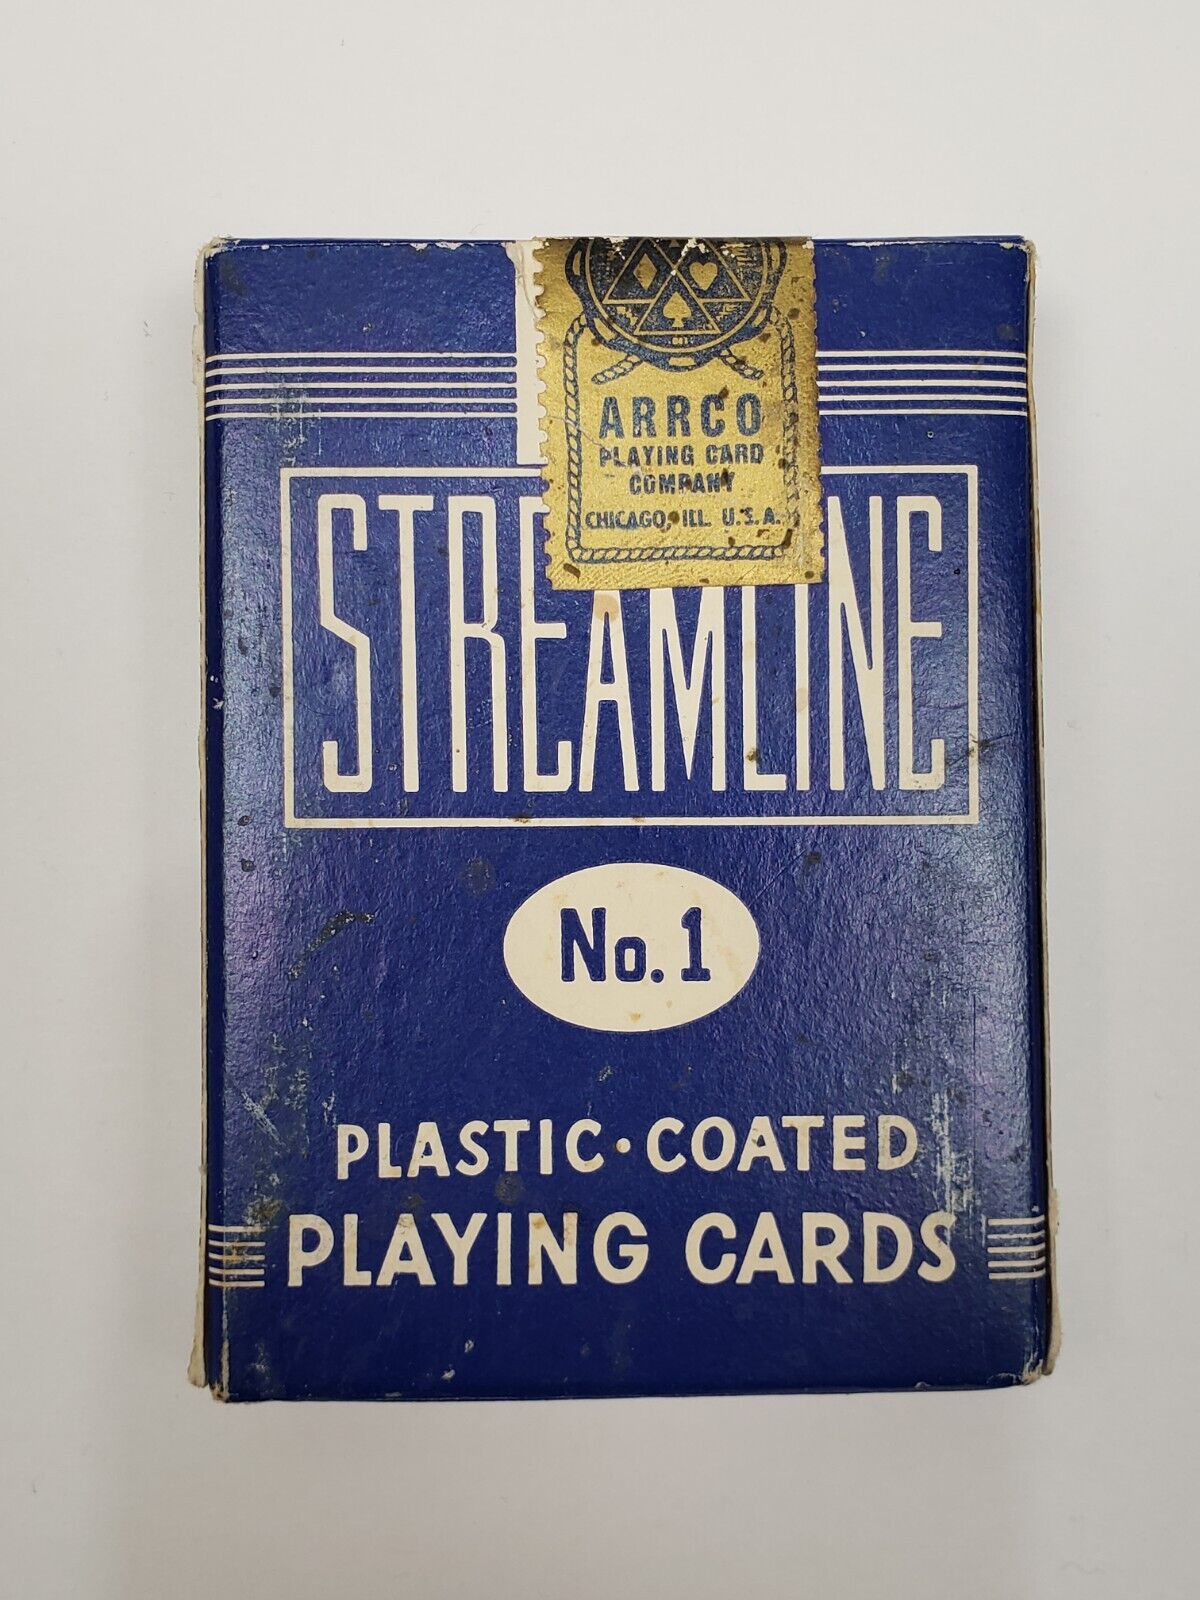 Vintage Streamline Playing Cards No. 1 Plastic Coated Blue Pack Sealed Box